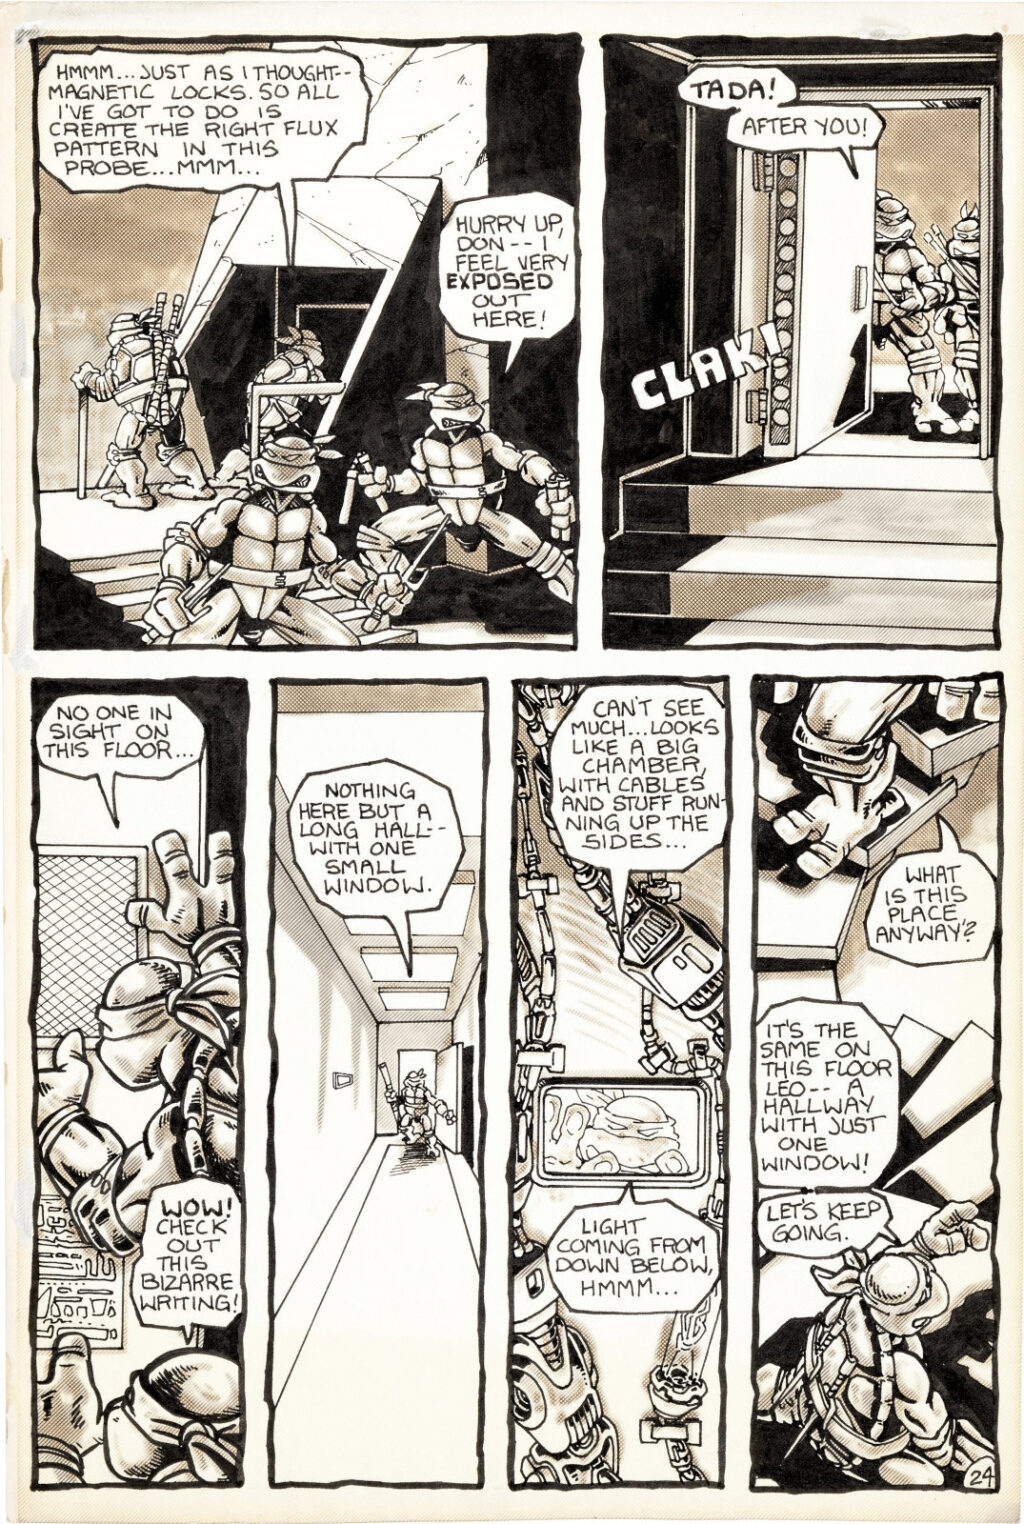 Teenage Mutant Ninja Turtles issue 4 page 20 by Kevin Eastman and Peter Laird